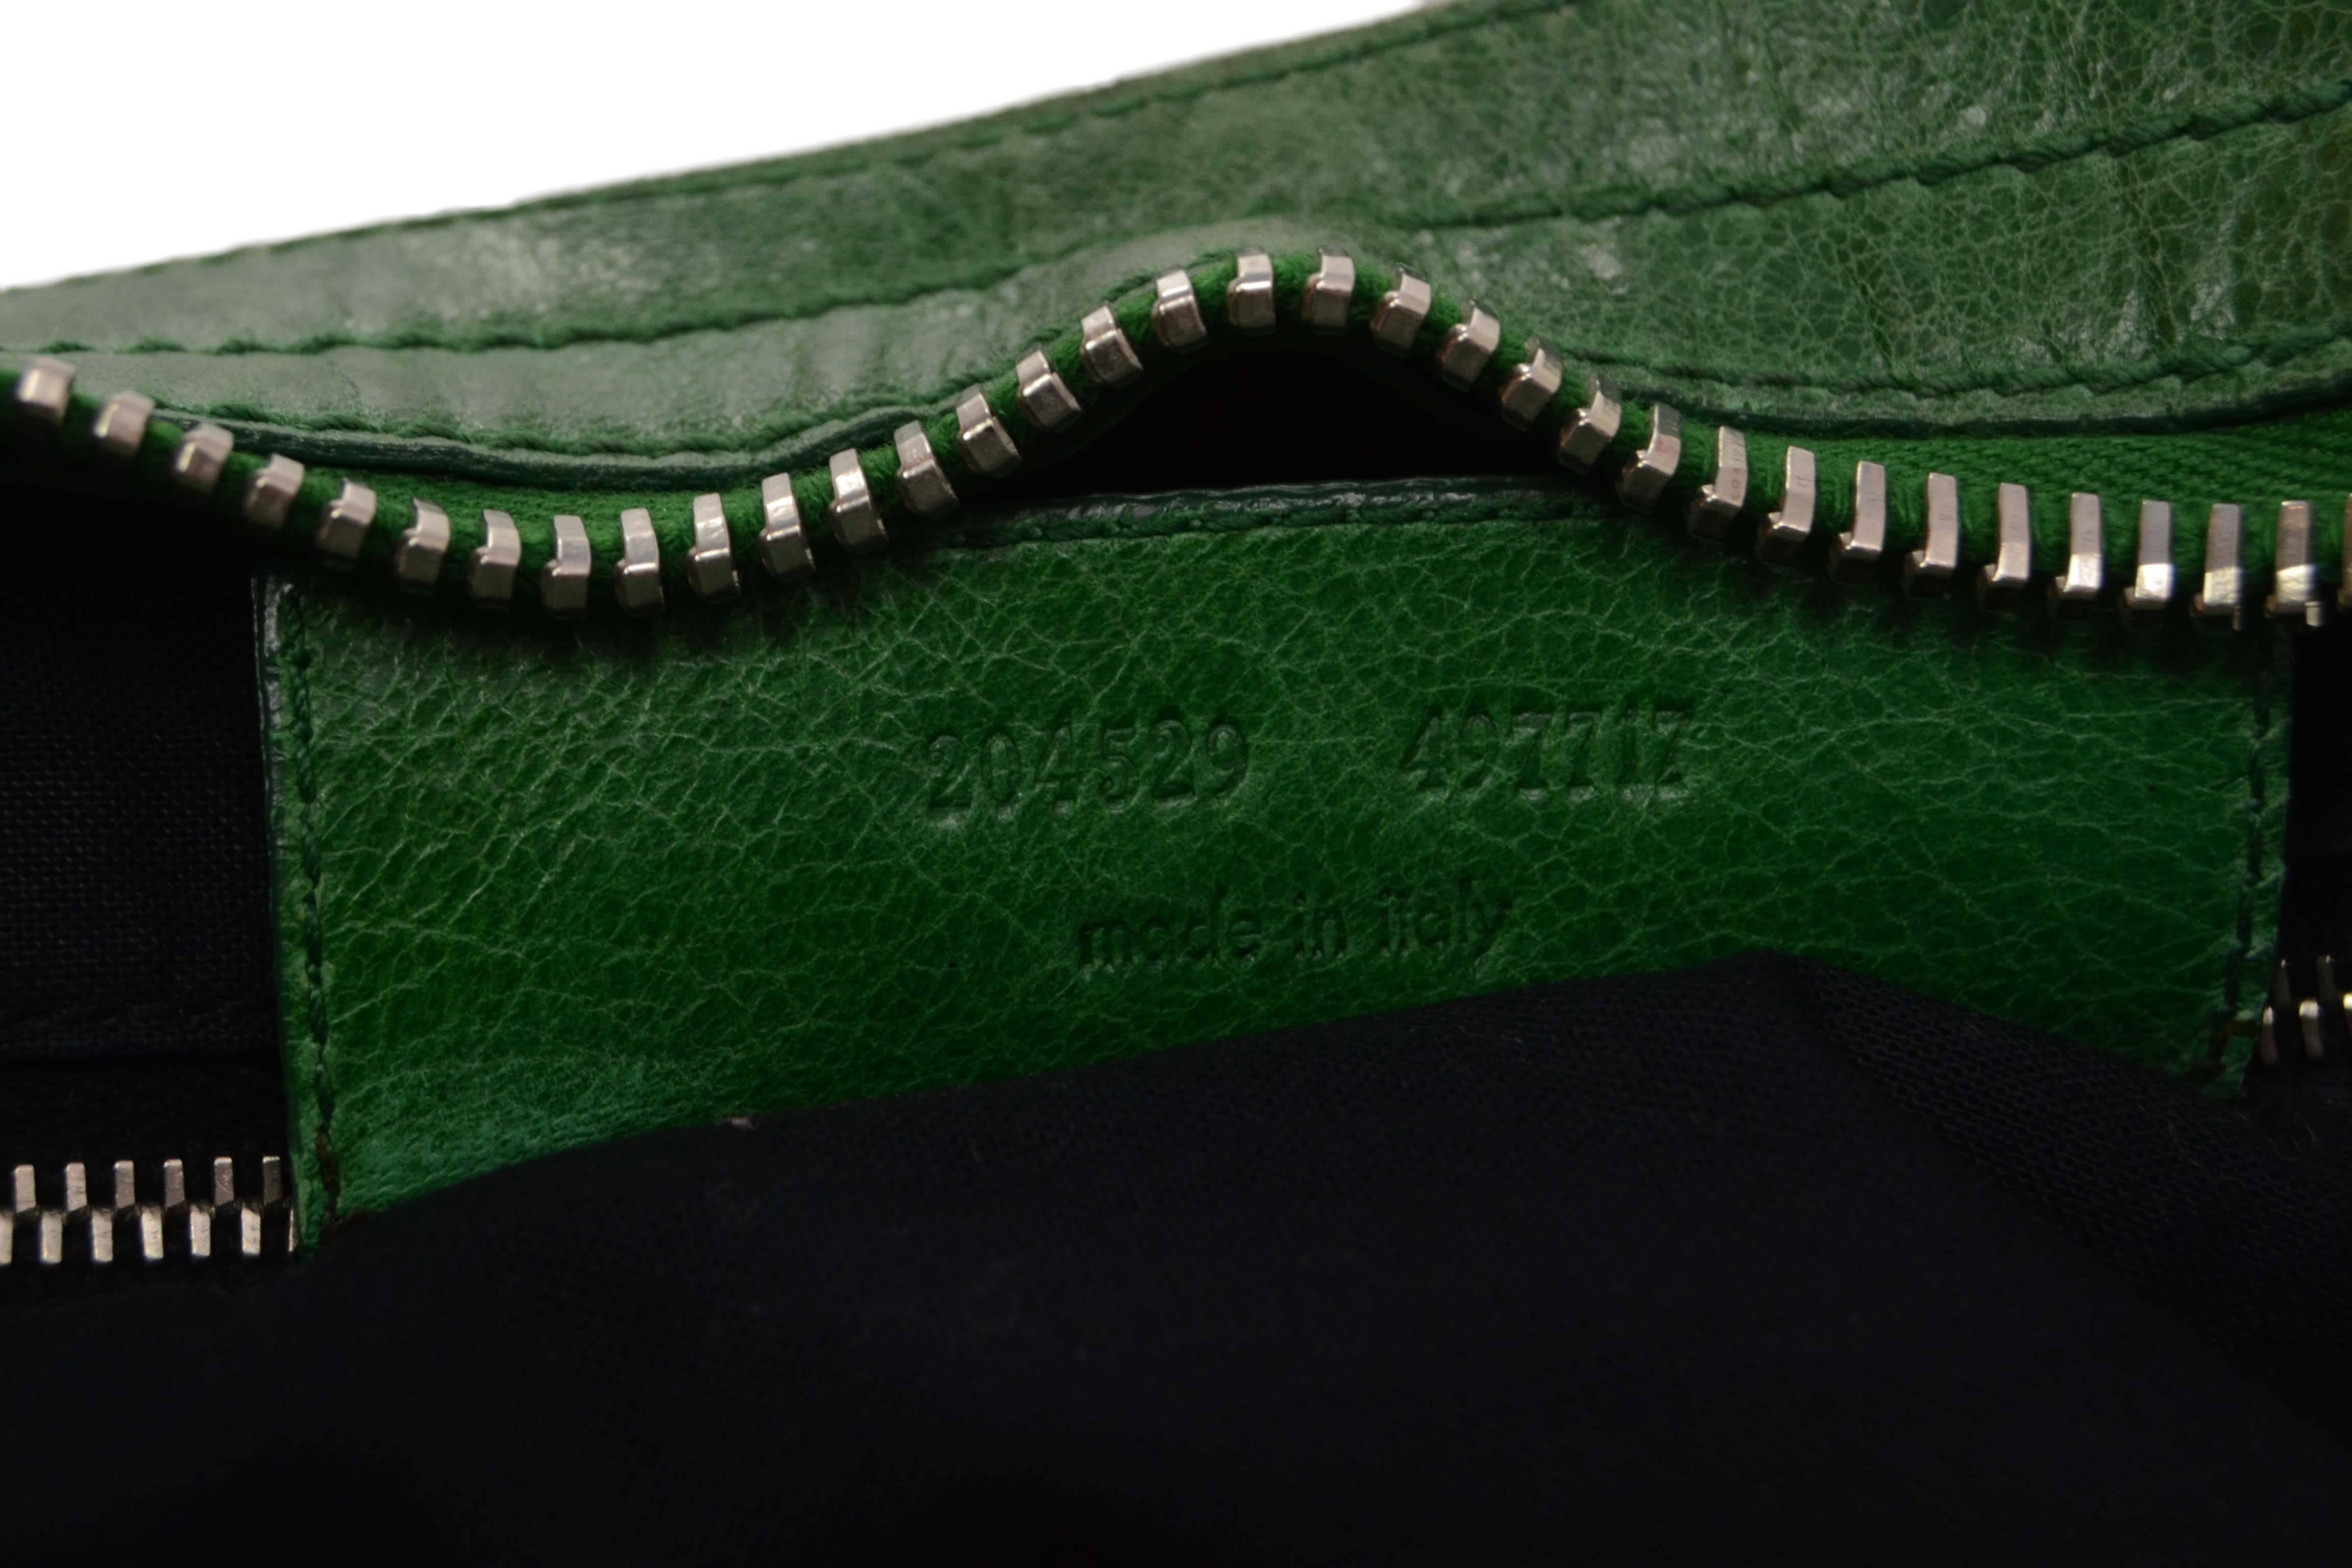 Balenciaga Green Leather Giant Brogues Covered Motorcycle City Bag rt. $2, 045 1